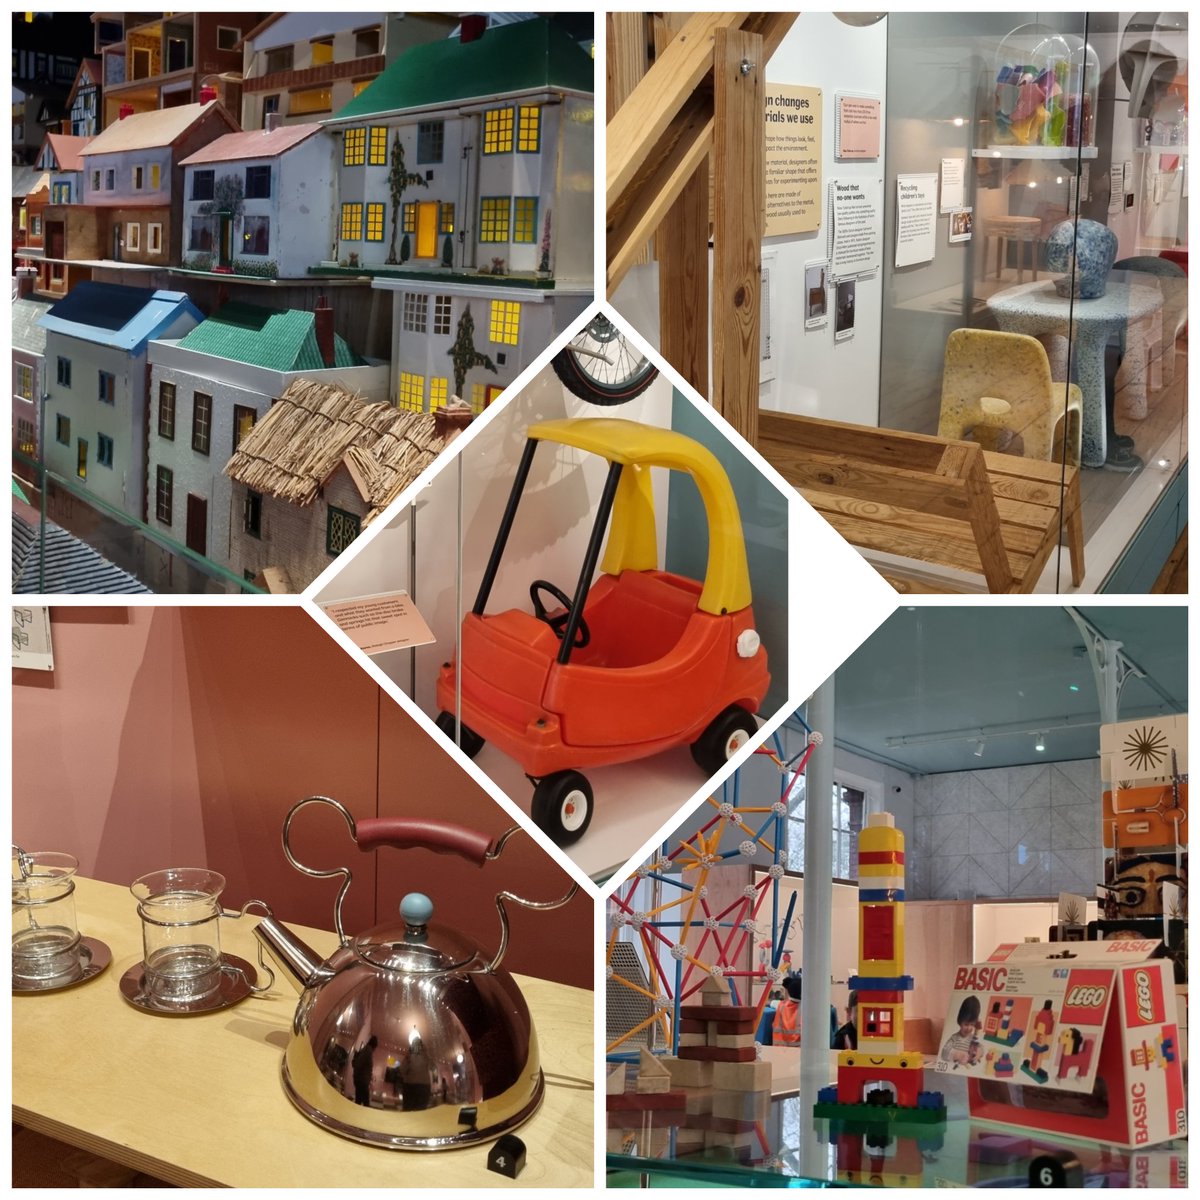 Highlights from a great trip learning about design history with Year 12 & 13 Product Design students at @young_vam & @MuseumoftheHome 🏠🎄🧸🤖